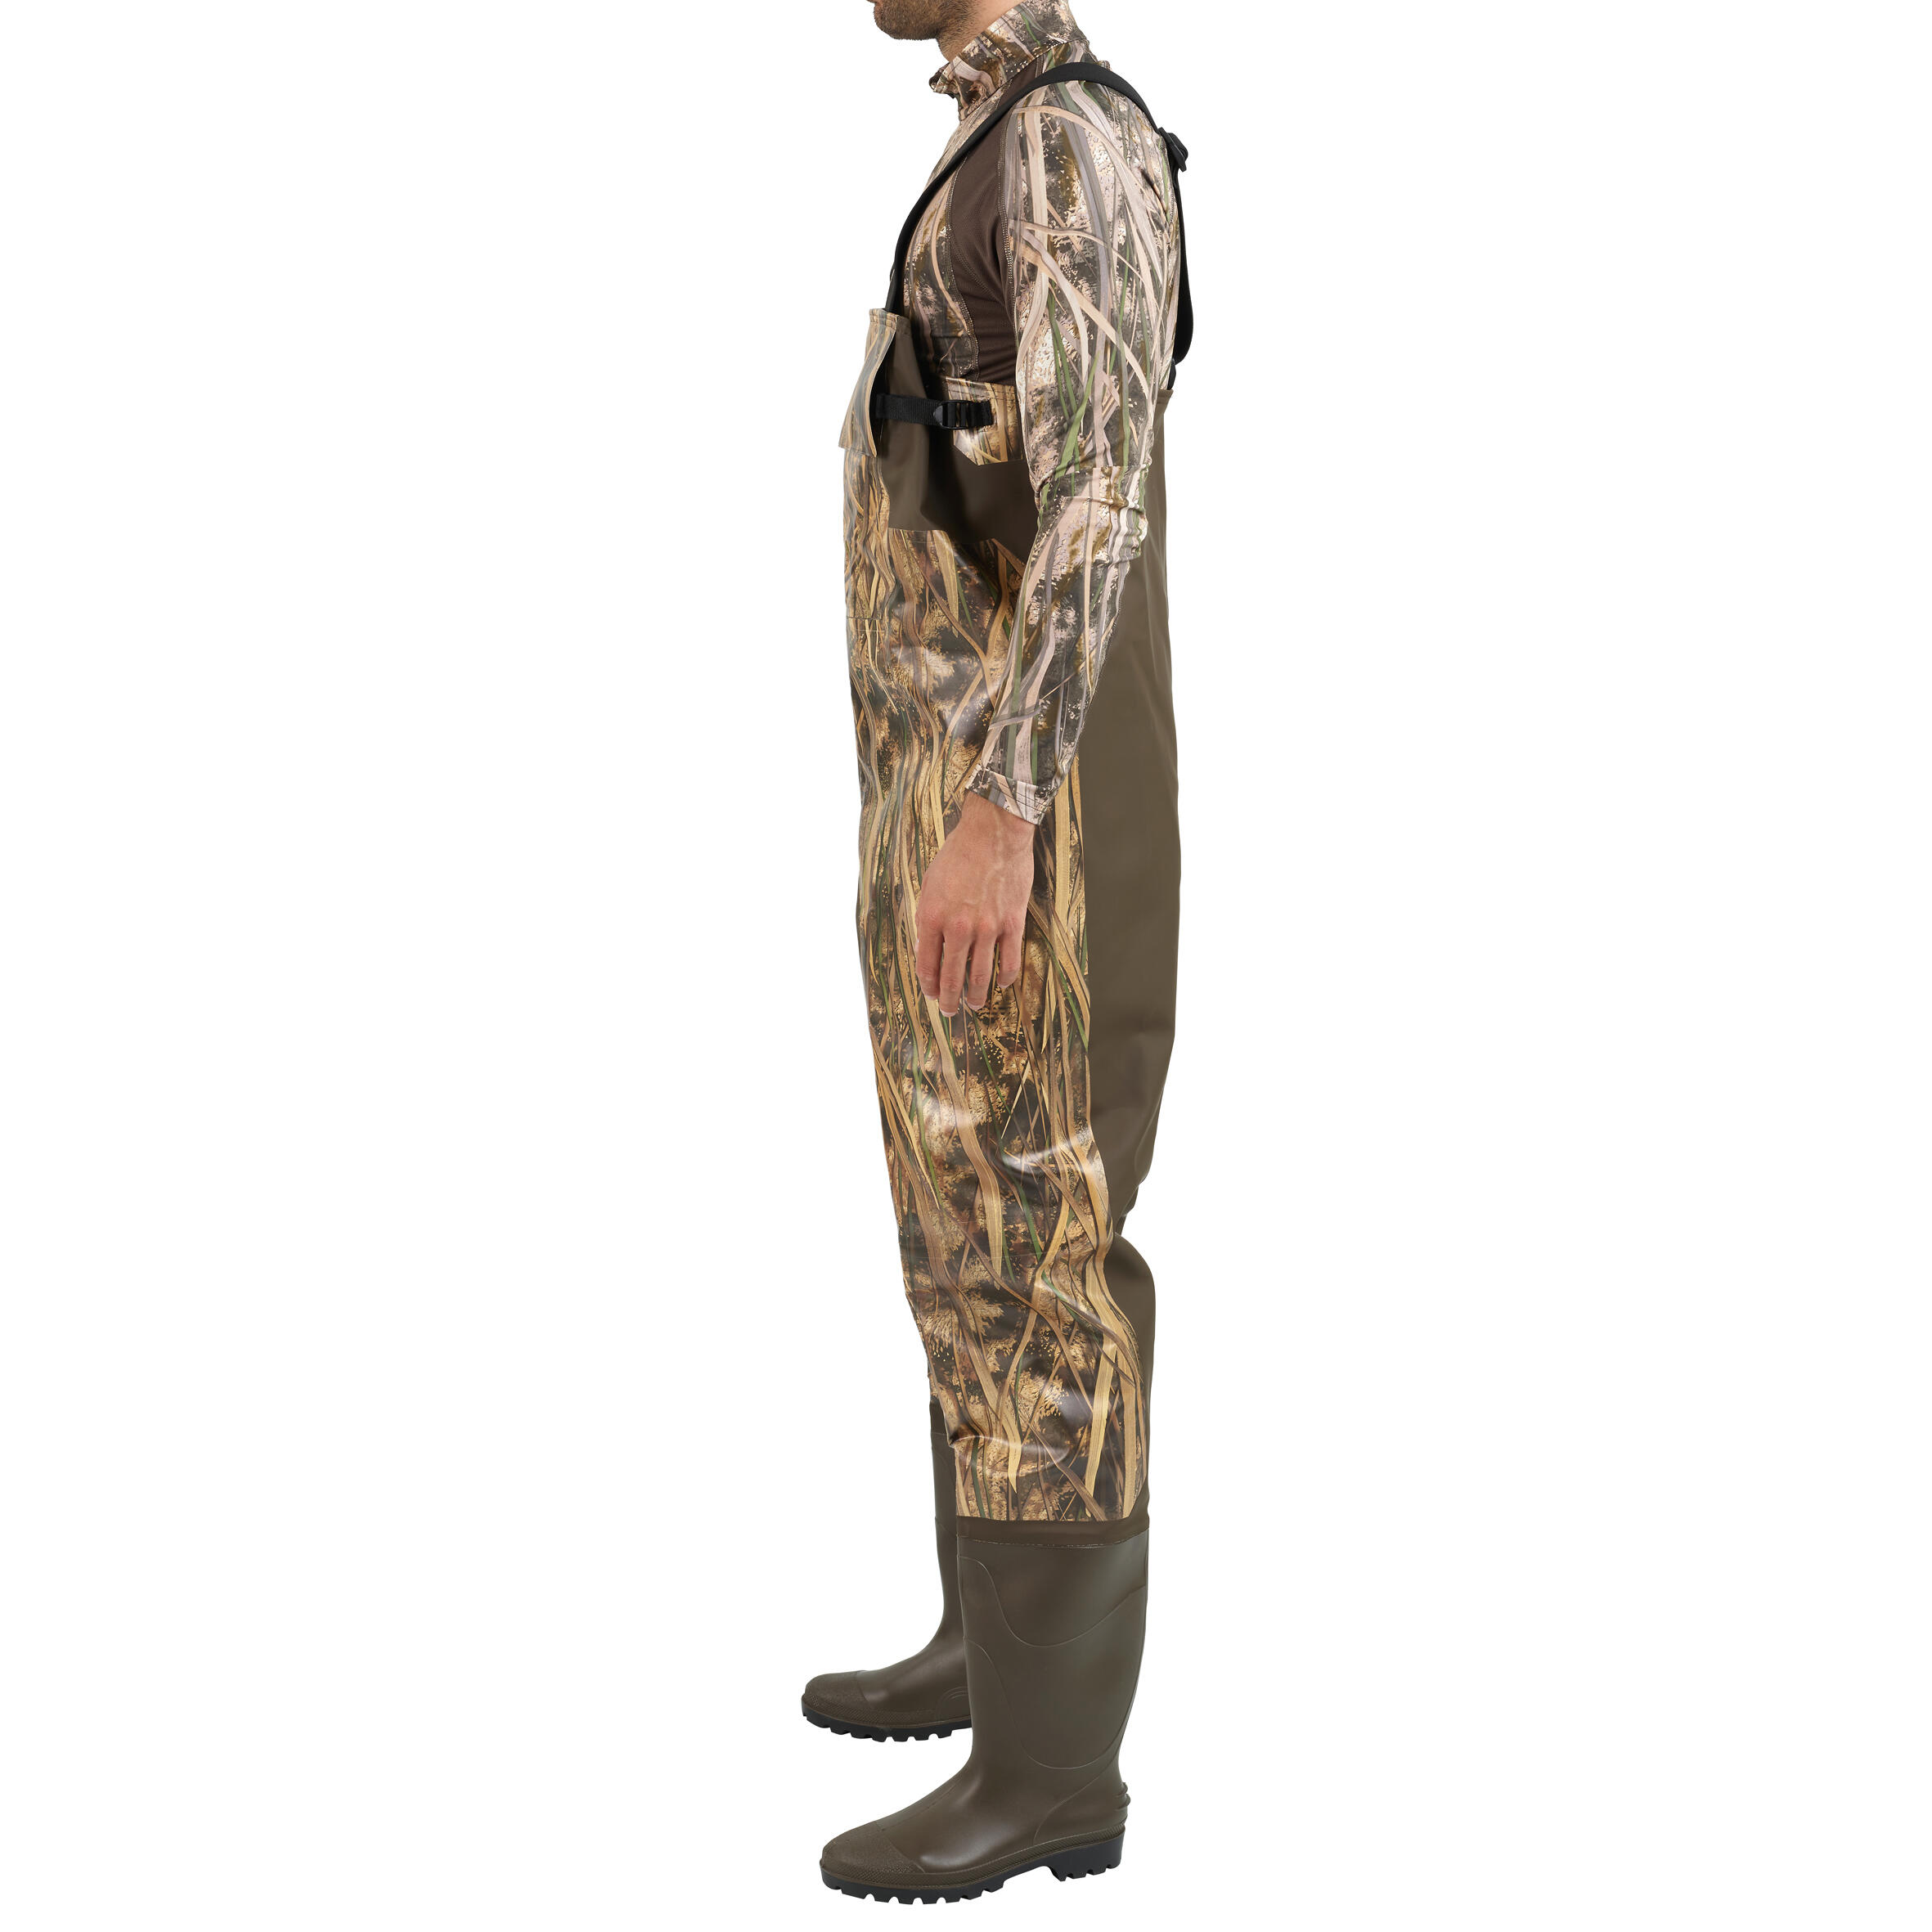 Camo Wader Storage Bag, Expandable Duck Hunting Wader Bag with Fold-Out  Neoprene Mat and Waterproof Pockets, Mossy Oak Bottomland Camo